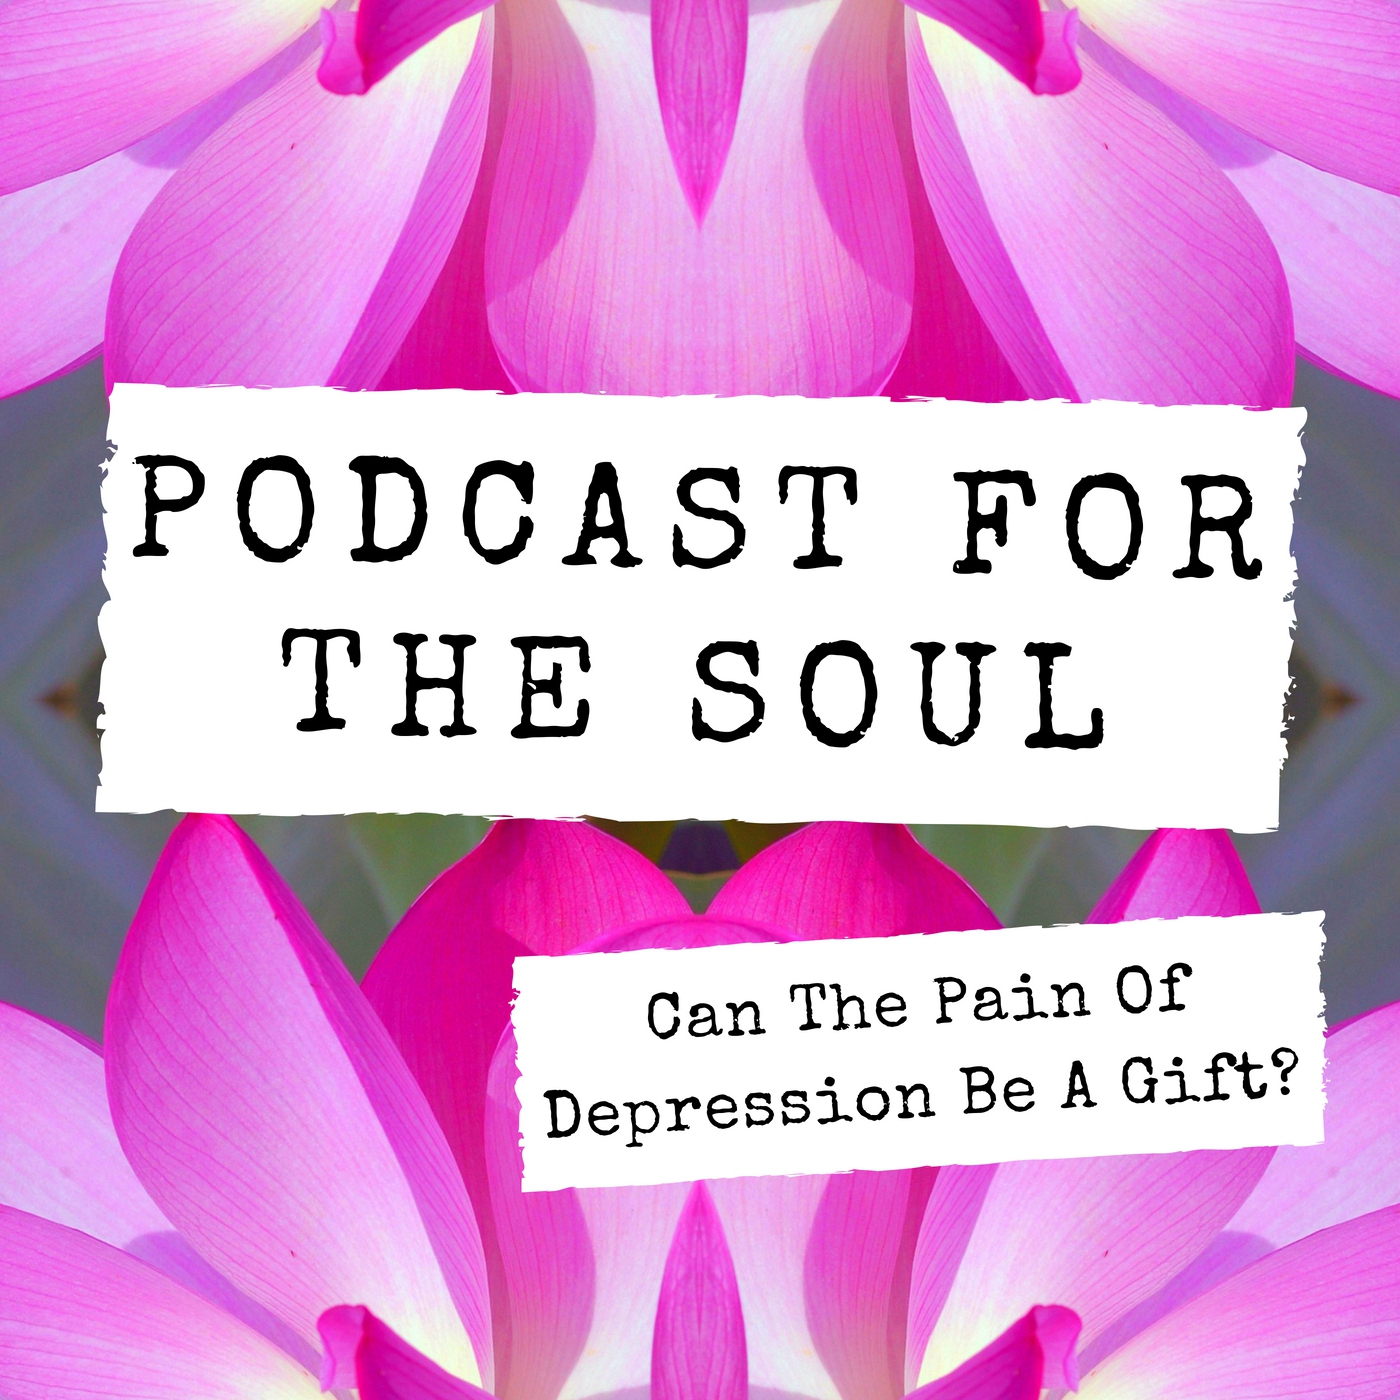 Can The Pain Of Depression Be A Gift?